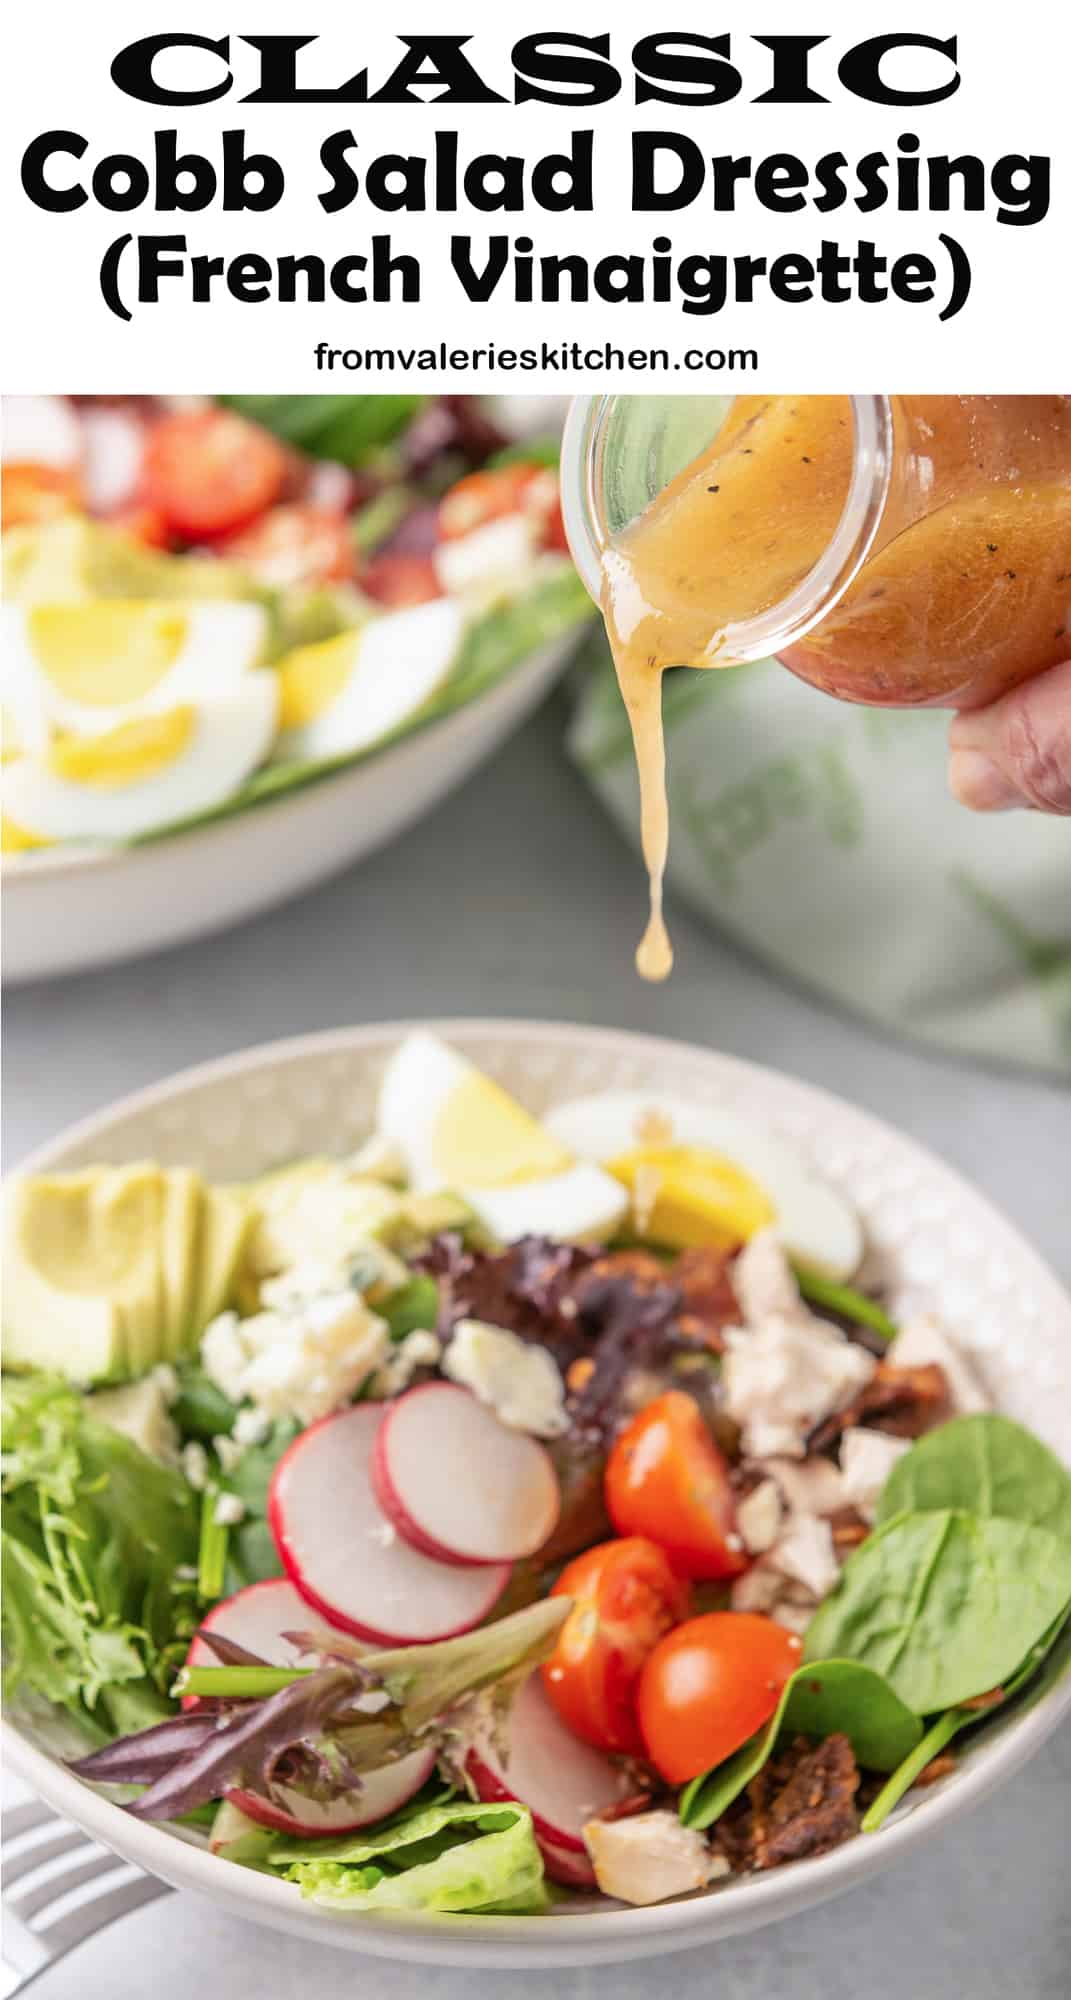 Classic Cobb Salad Dressing pours over the top of a salad in a white bowl (with overlay text).